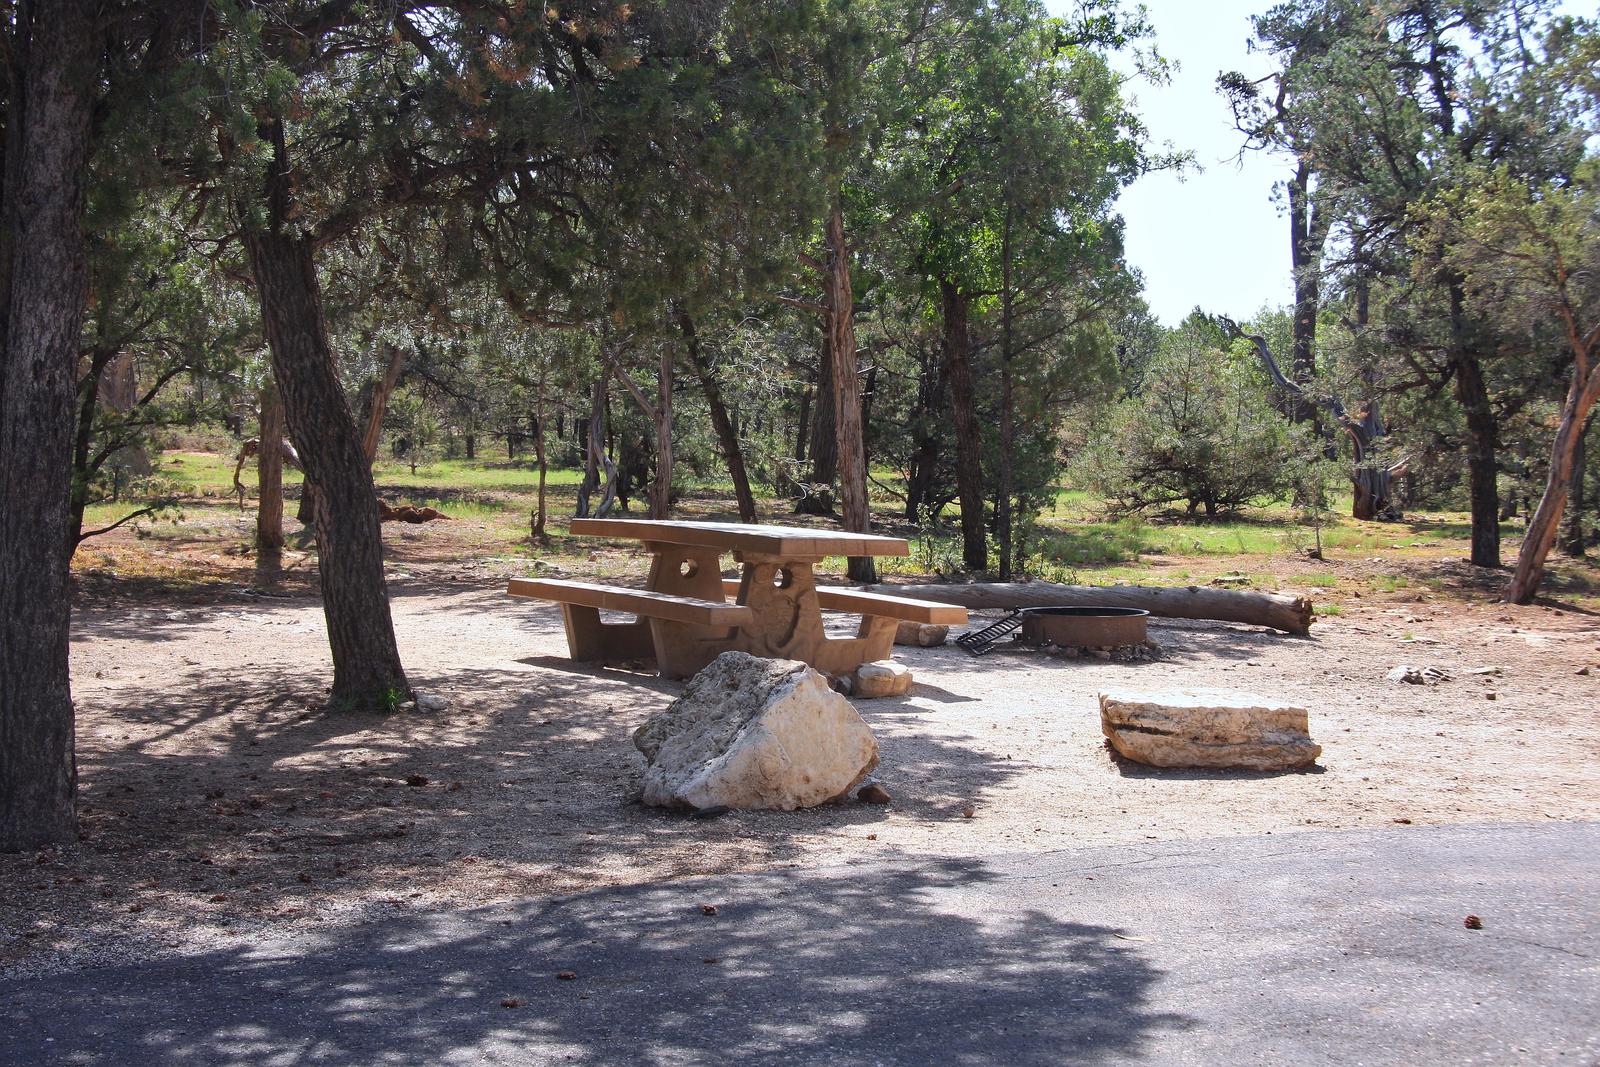 Picnic table, fire pit, and parking spot, Mather CampgroundPicnic table, fire pit, and parking spot for Maple Loop 197, Mather Campground